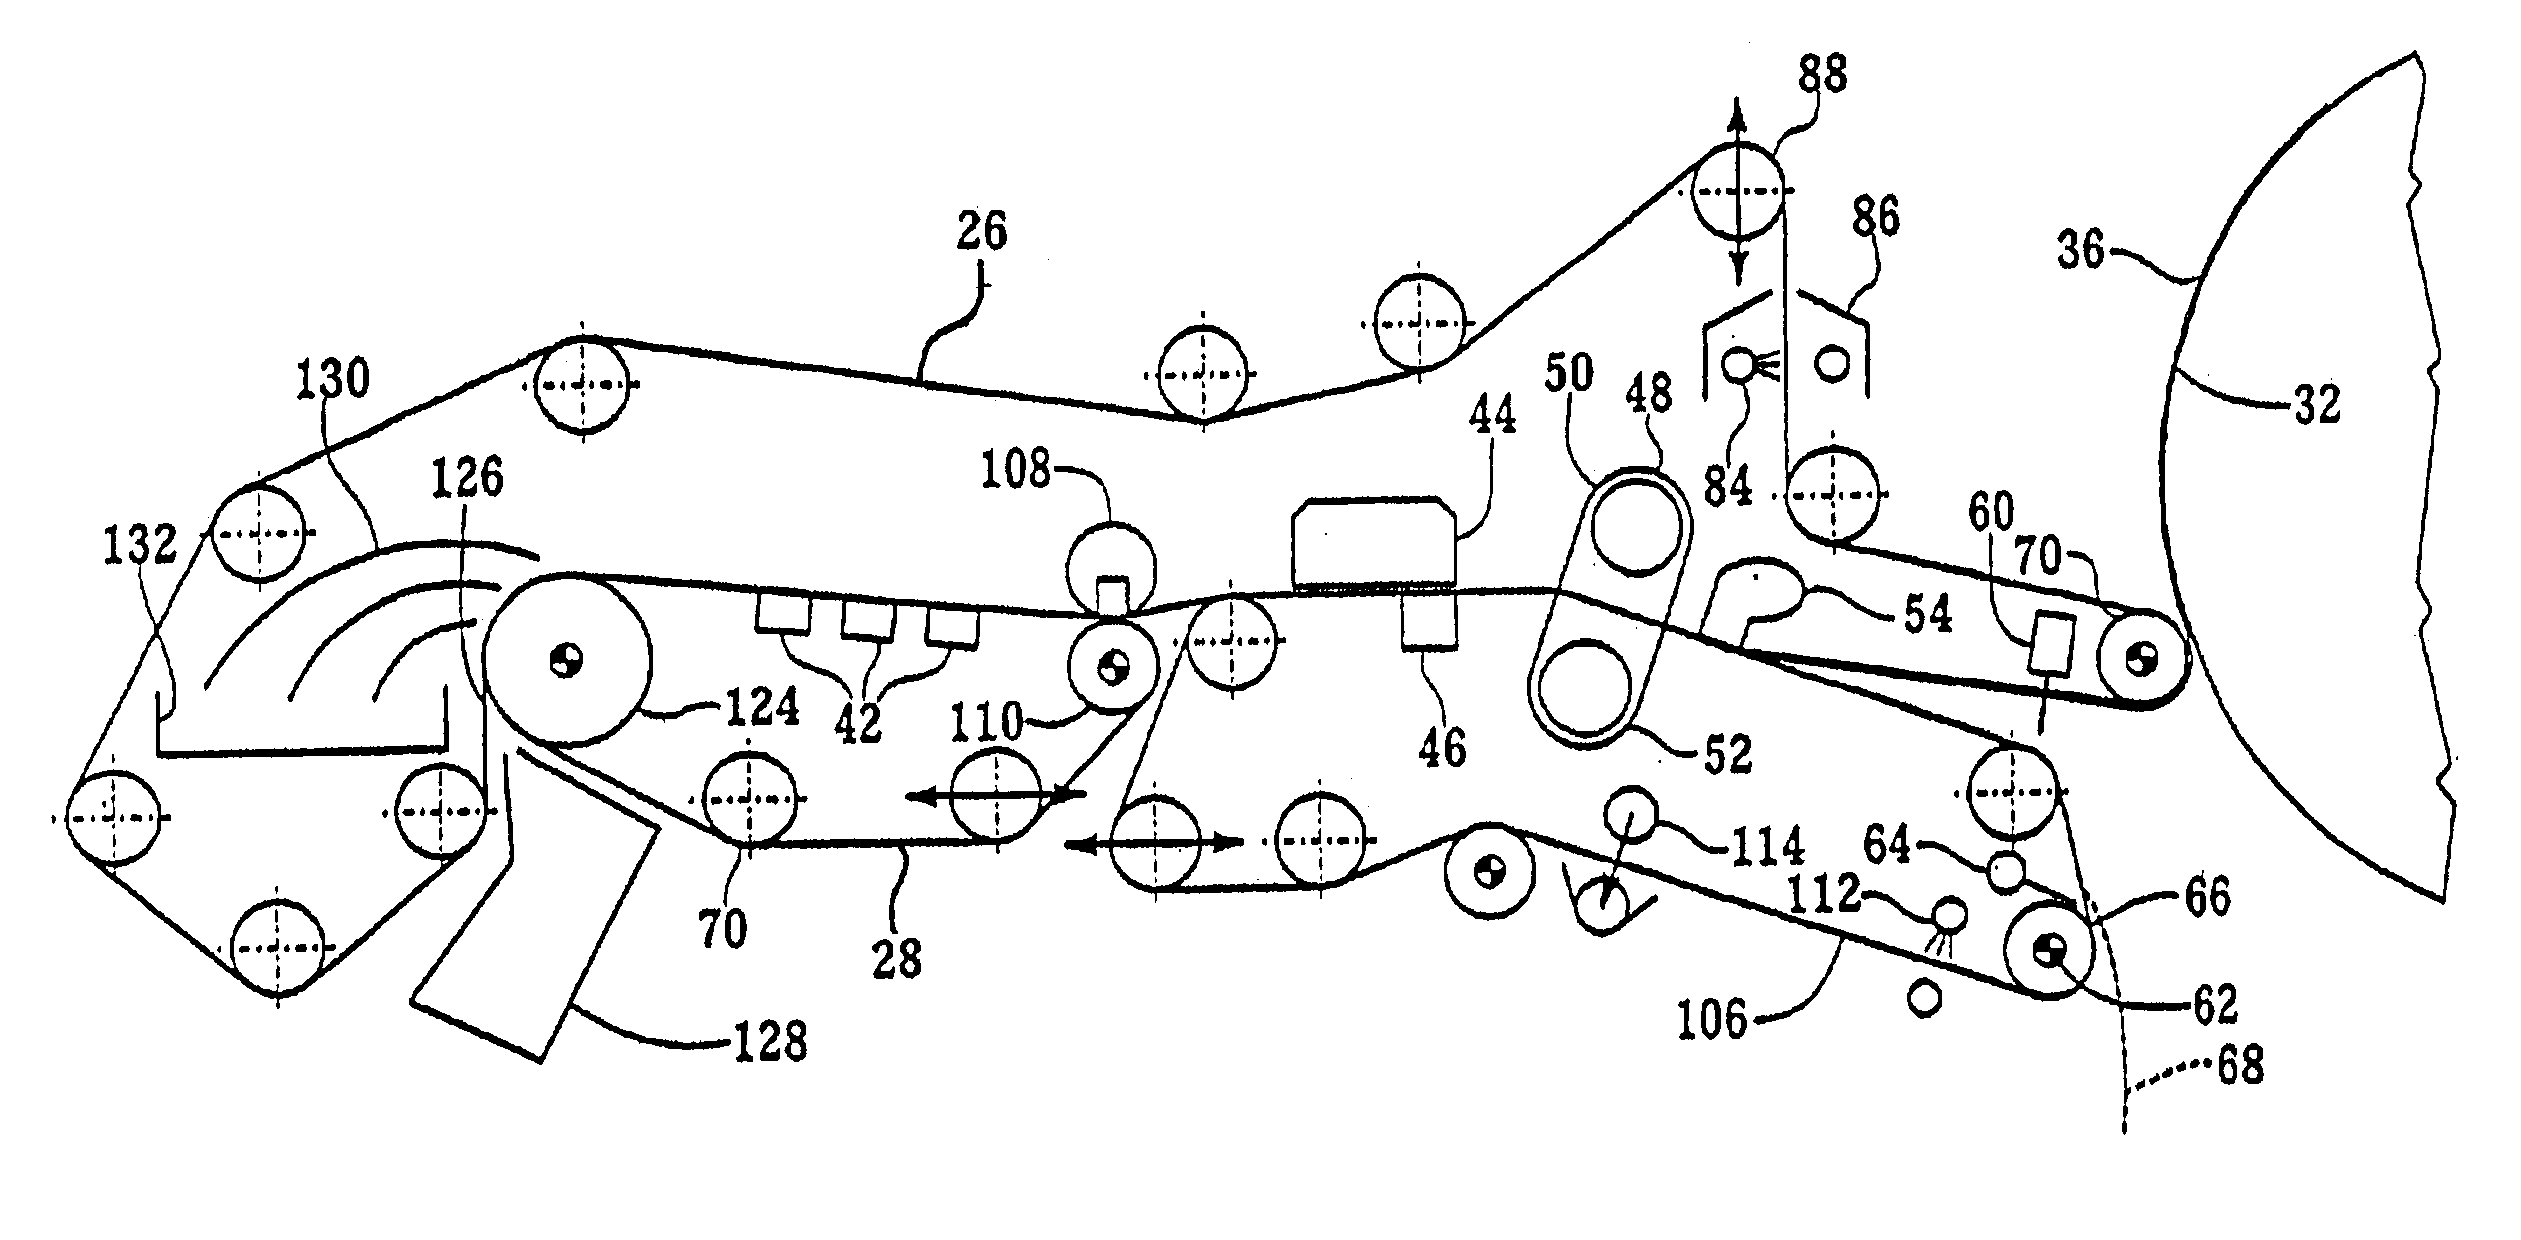 Papermaking machine for forming tissue employing an air press